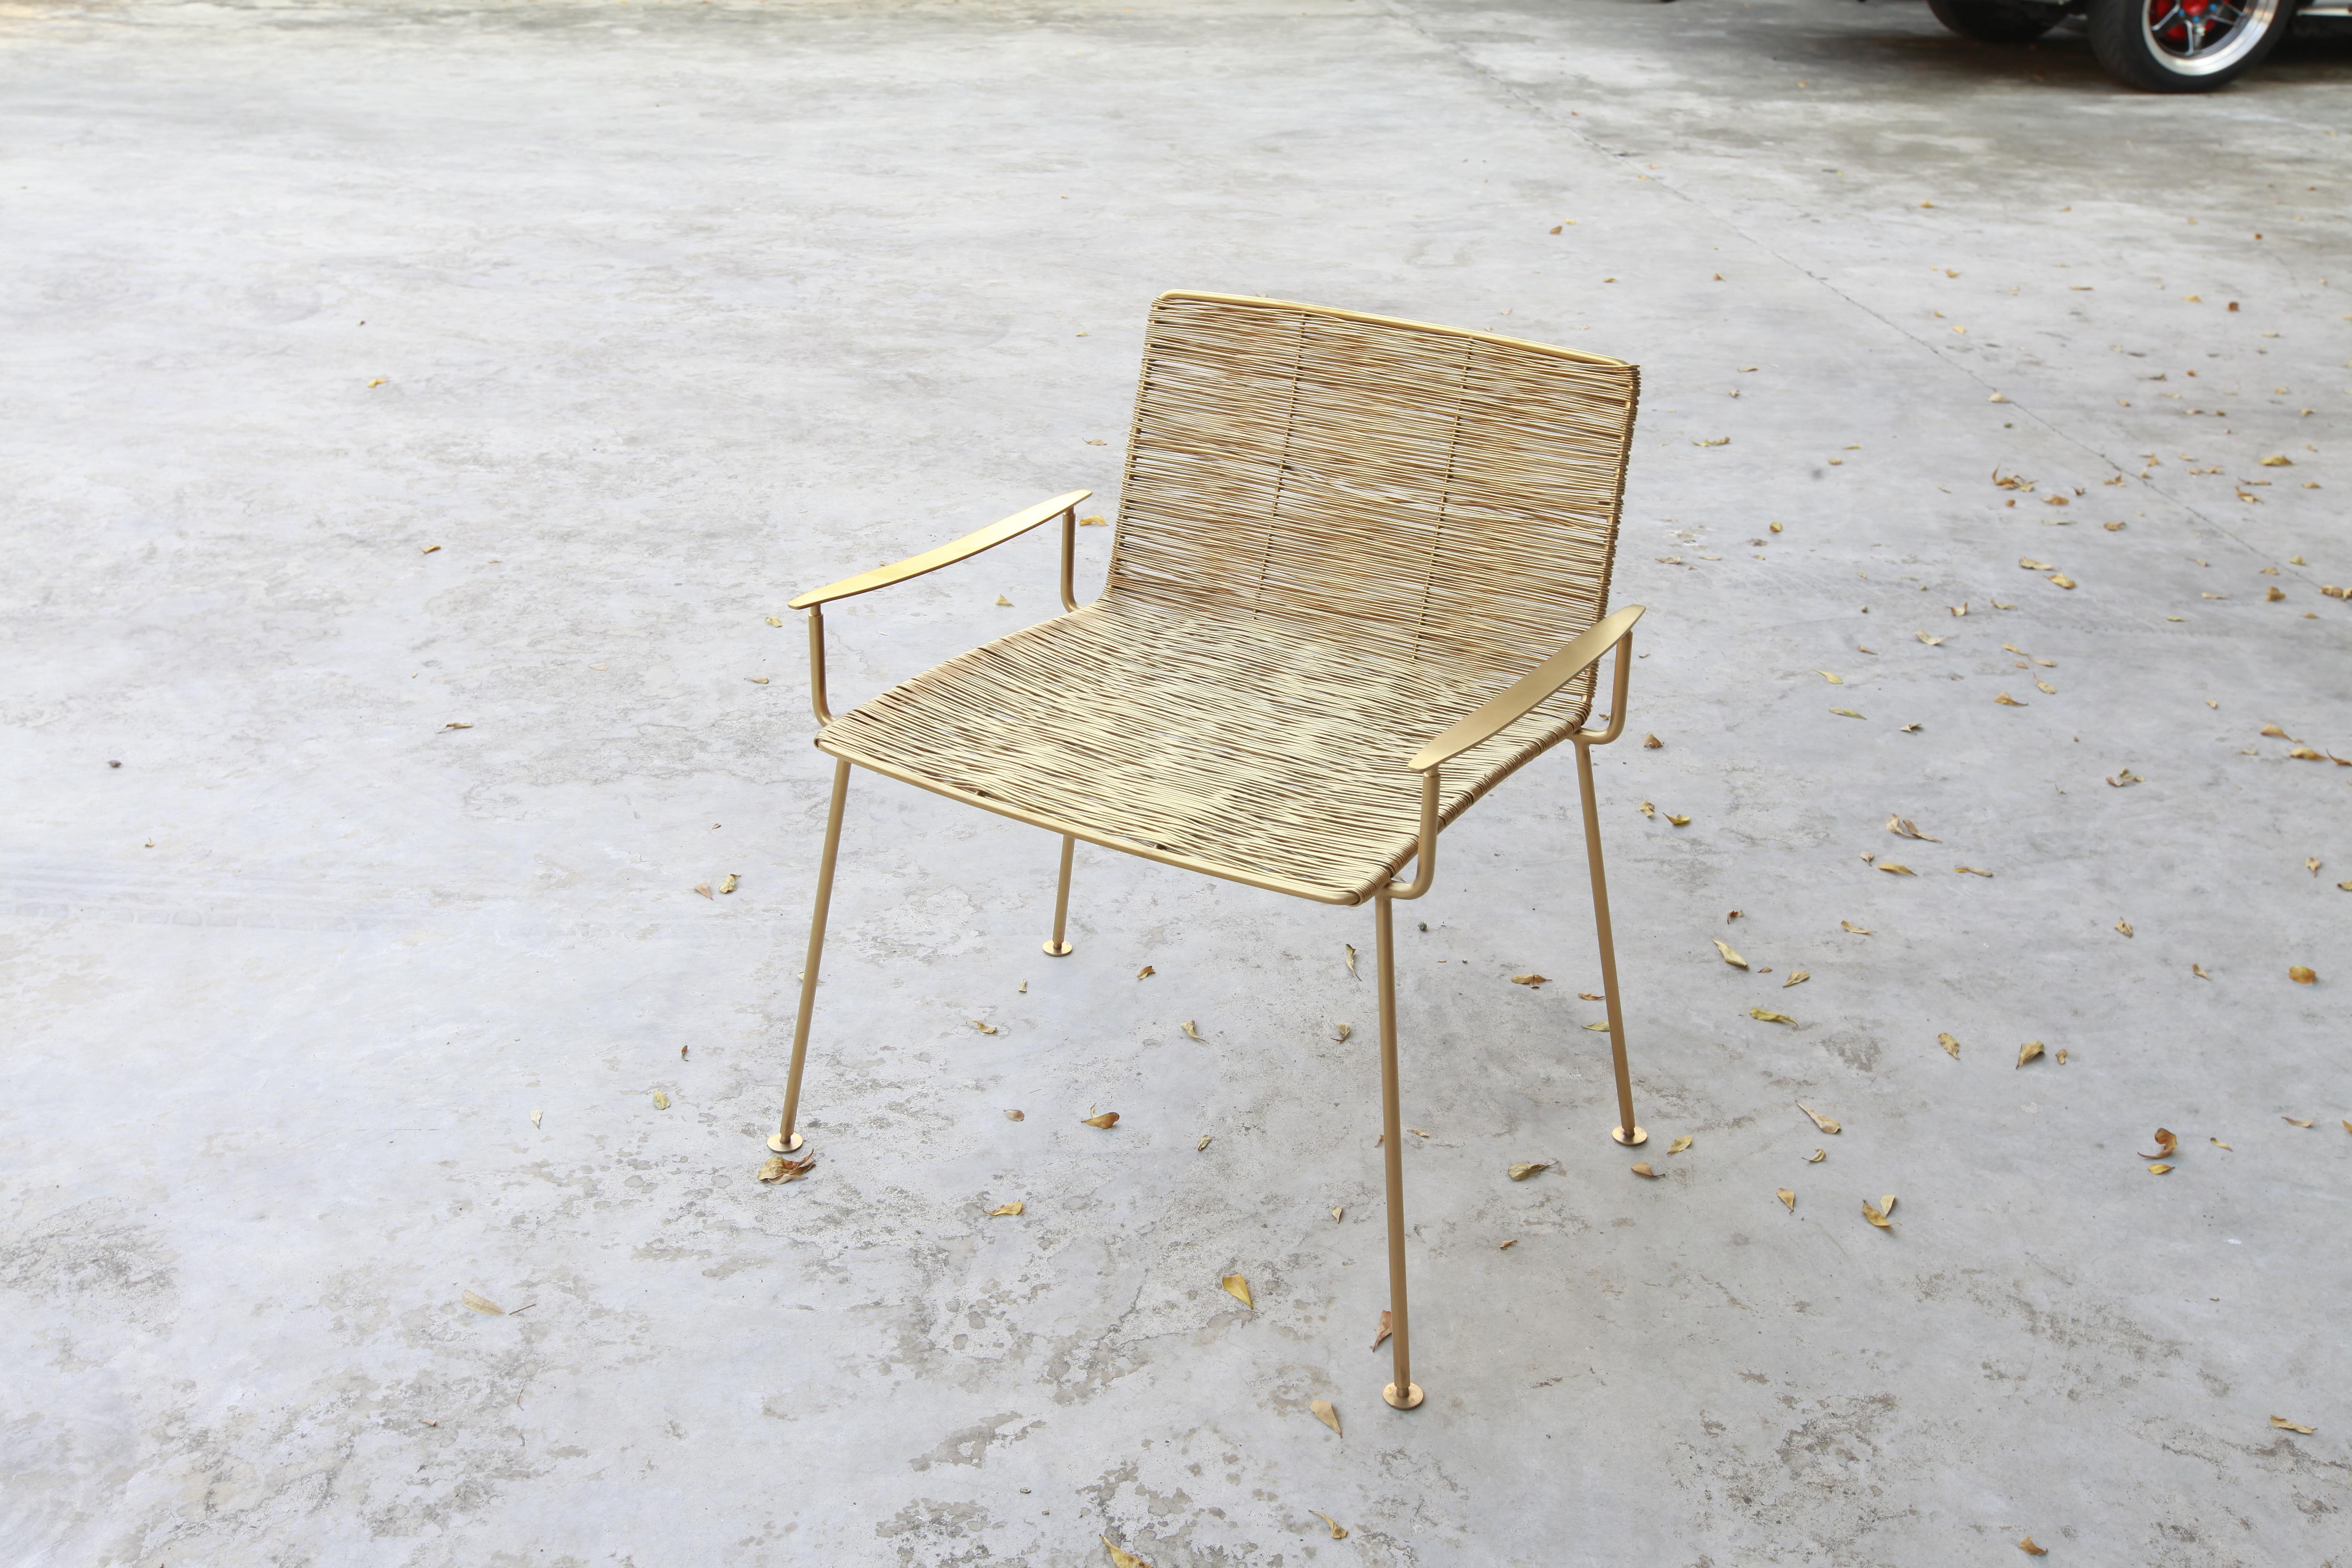 Gold Boy outdoor chairs in gold titanium finish created by Ango is a development of Garden Boy Chair, winner of Best Product Award at Maison et Objet, Paris in September 2007. Gold Boy garden chair is a kind of technology transfer, using as a